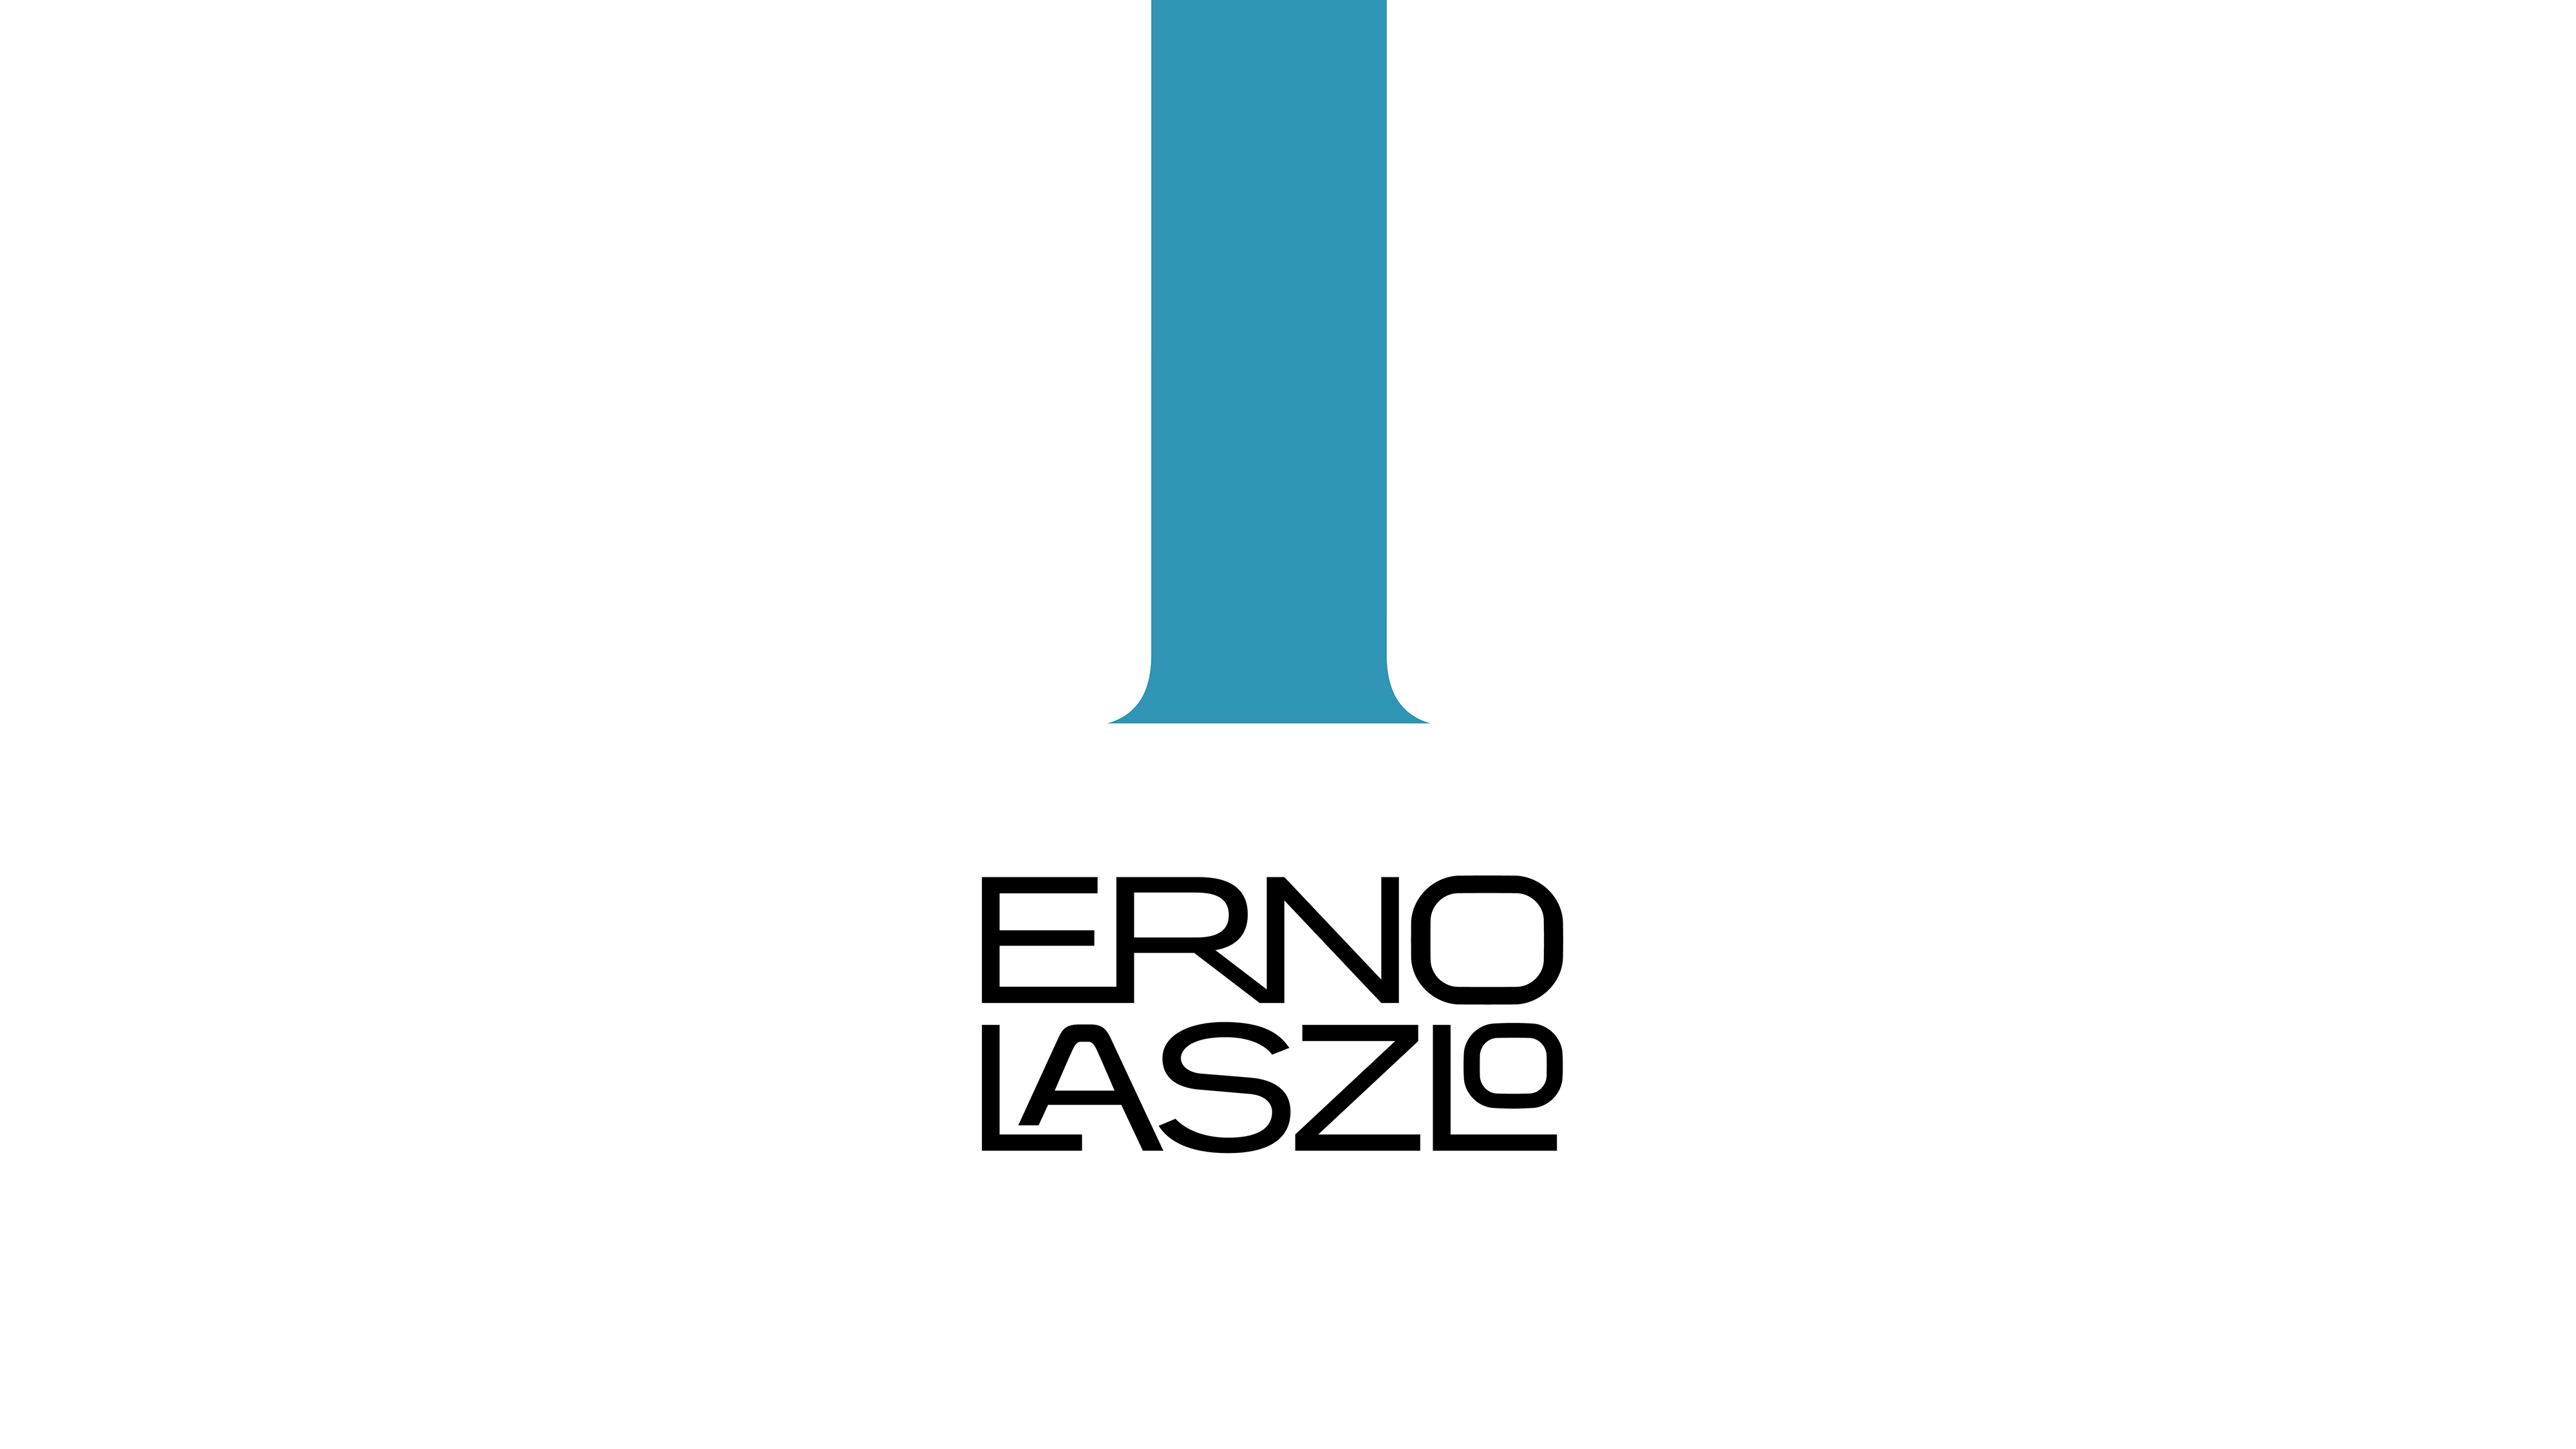 Erno Laszlo Strengthens Its Global Skincare Wellness Position With a New Brand Identity